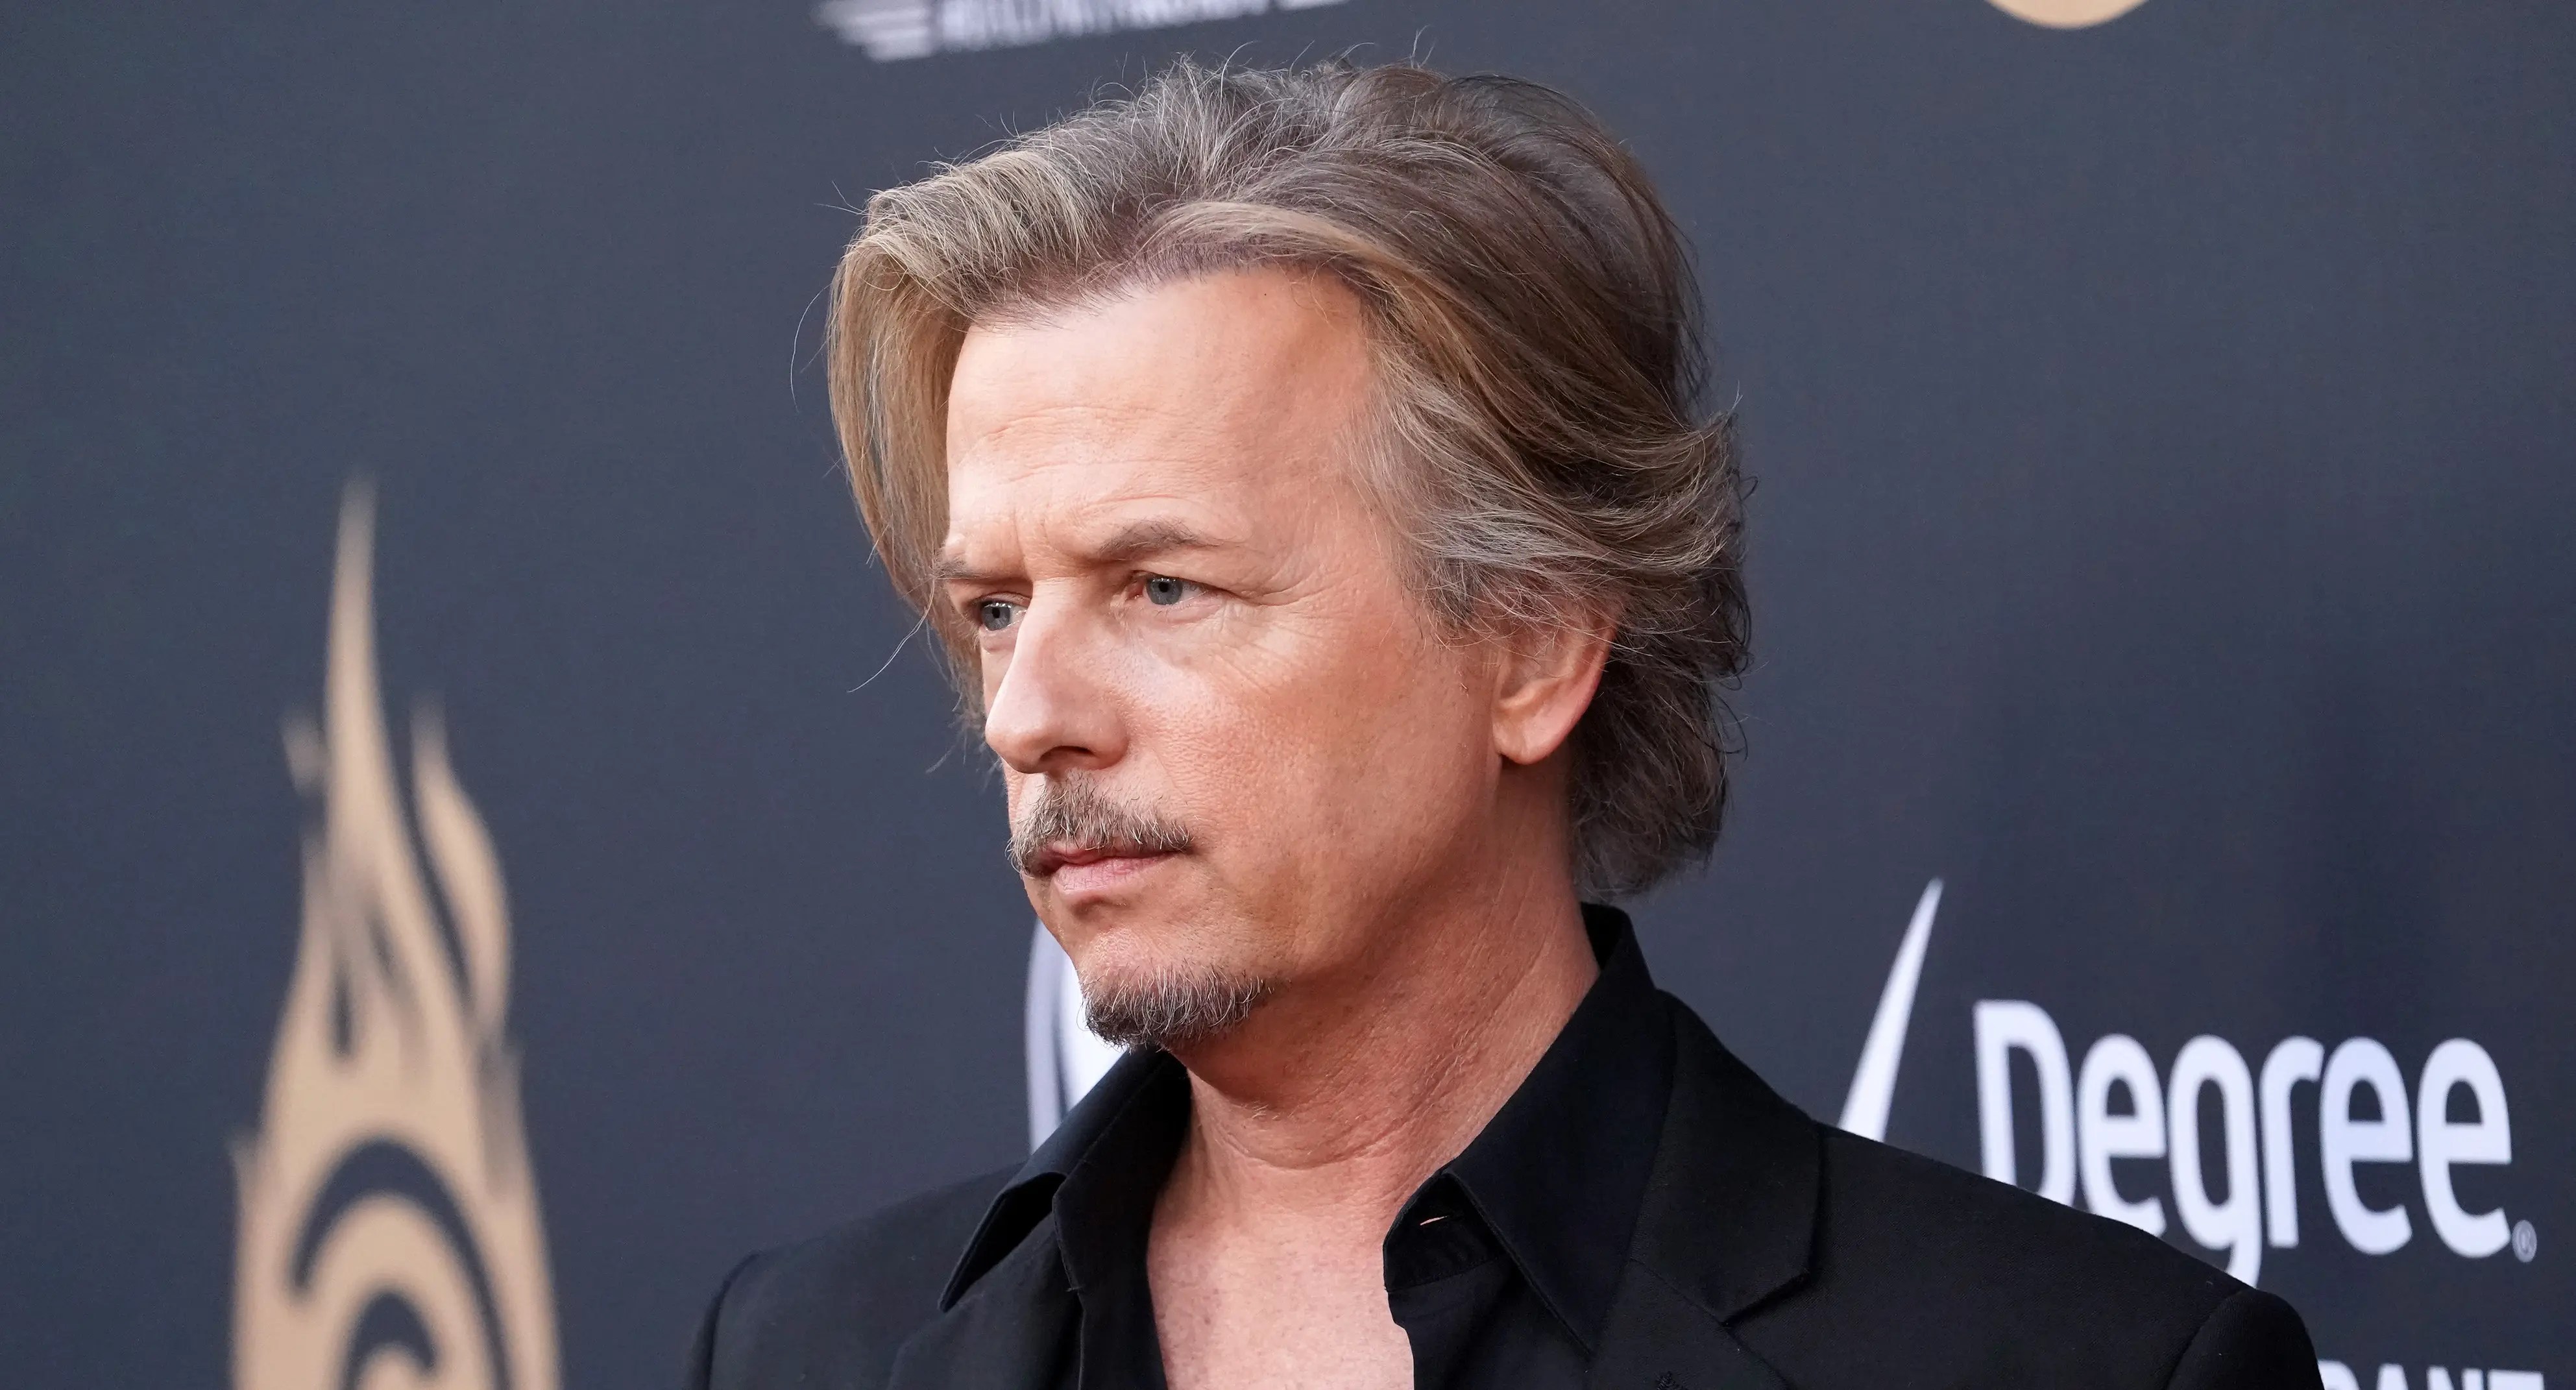 Who Is David Spade Dating? The 'Bachelor in Paradise' Host's Love Life